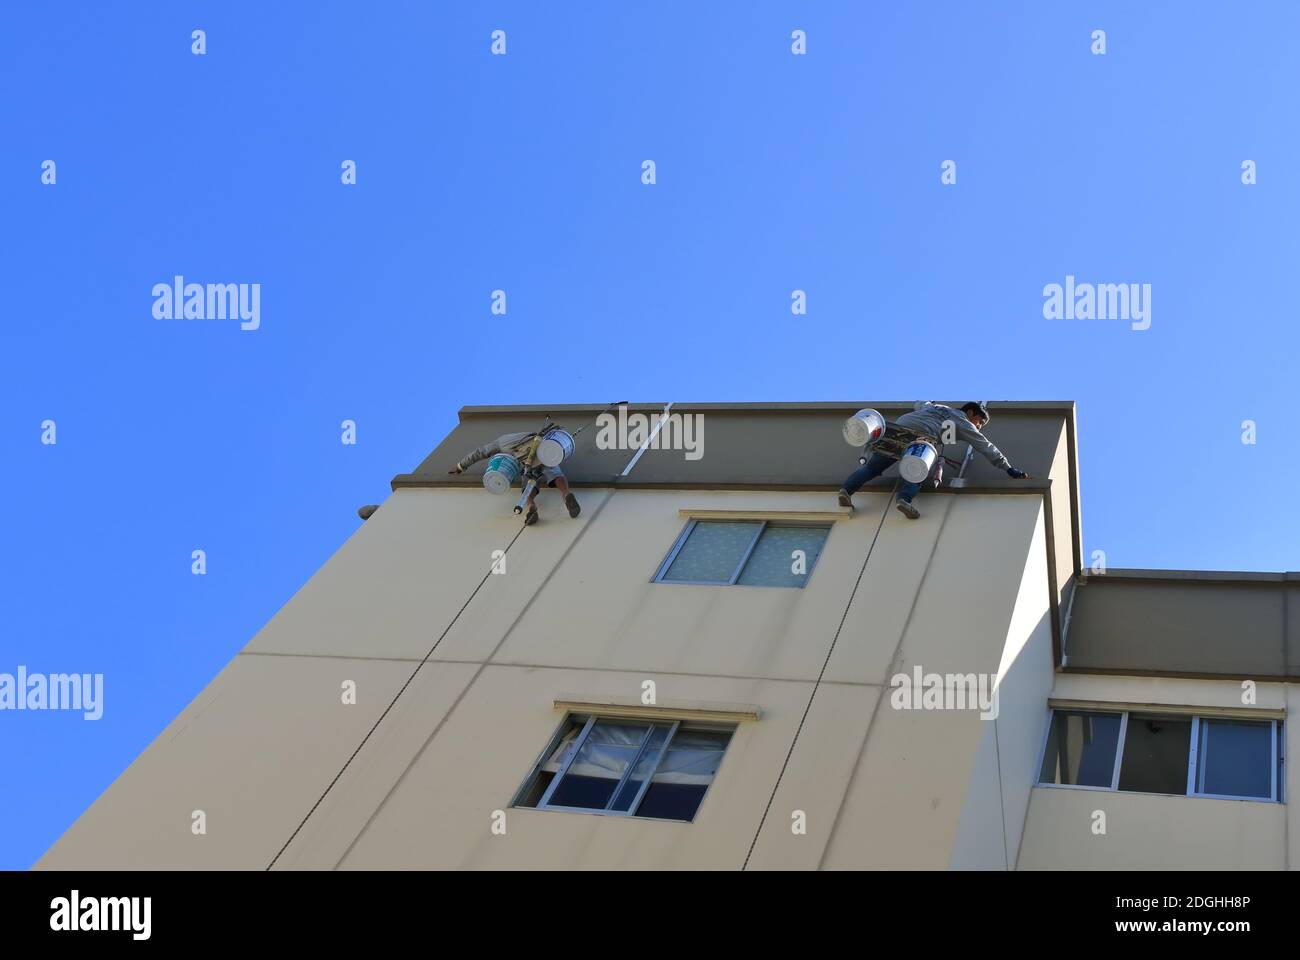 Bangkok, Thailand- December 9, 2020: Workers are repairing cracked wall outside a tall building by using sealant silicone and then painting Stock Photo